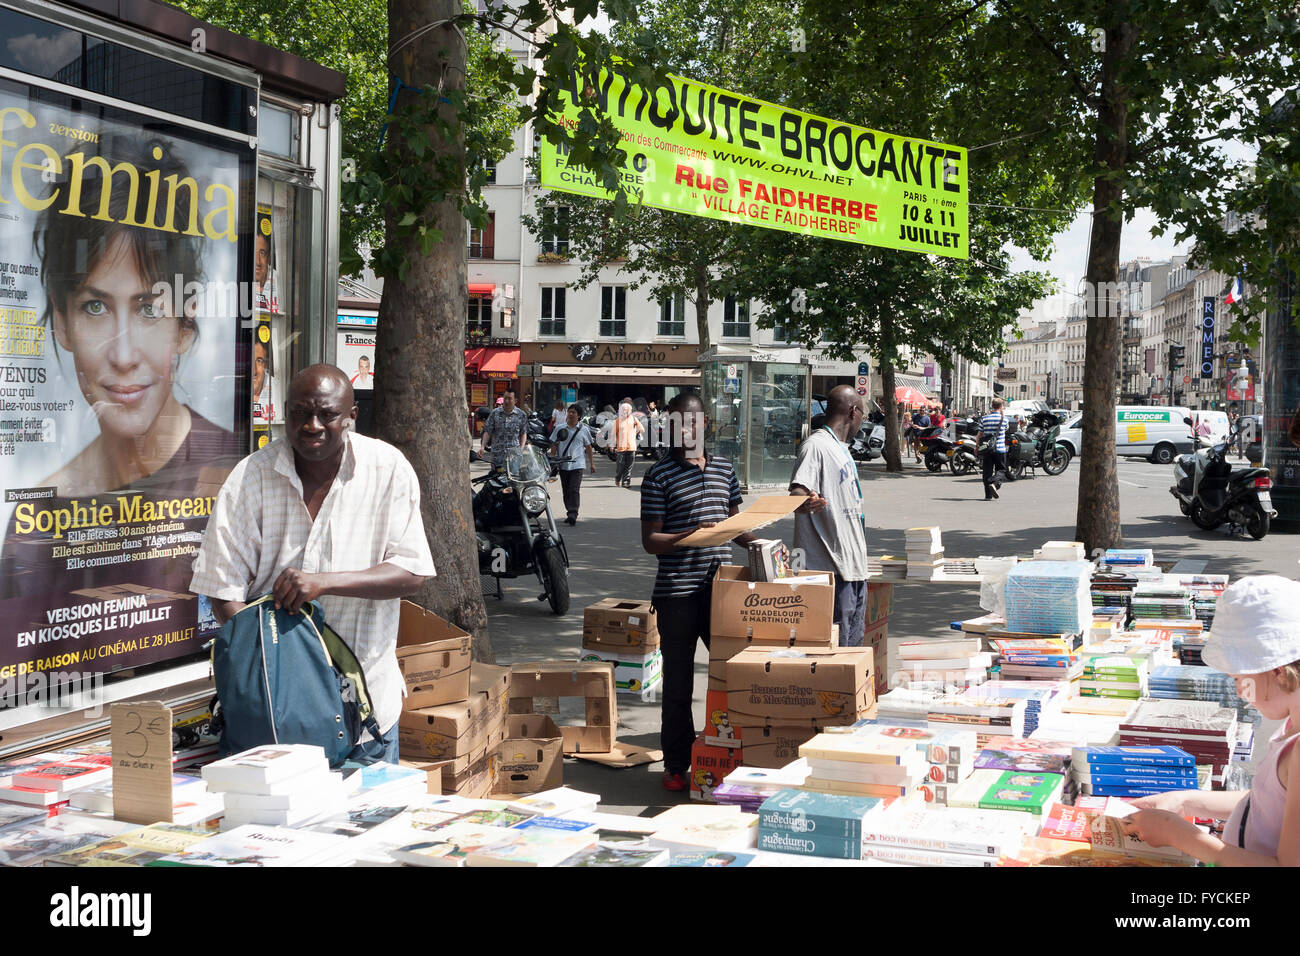 Mans selling books seen in the street in Paris. France.  Pic Pako Mera Stock Photo